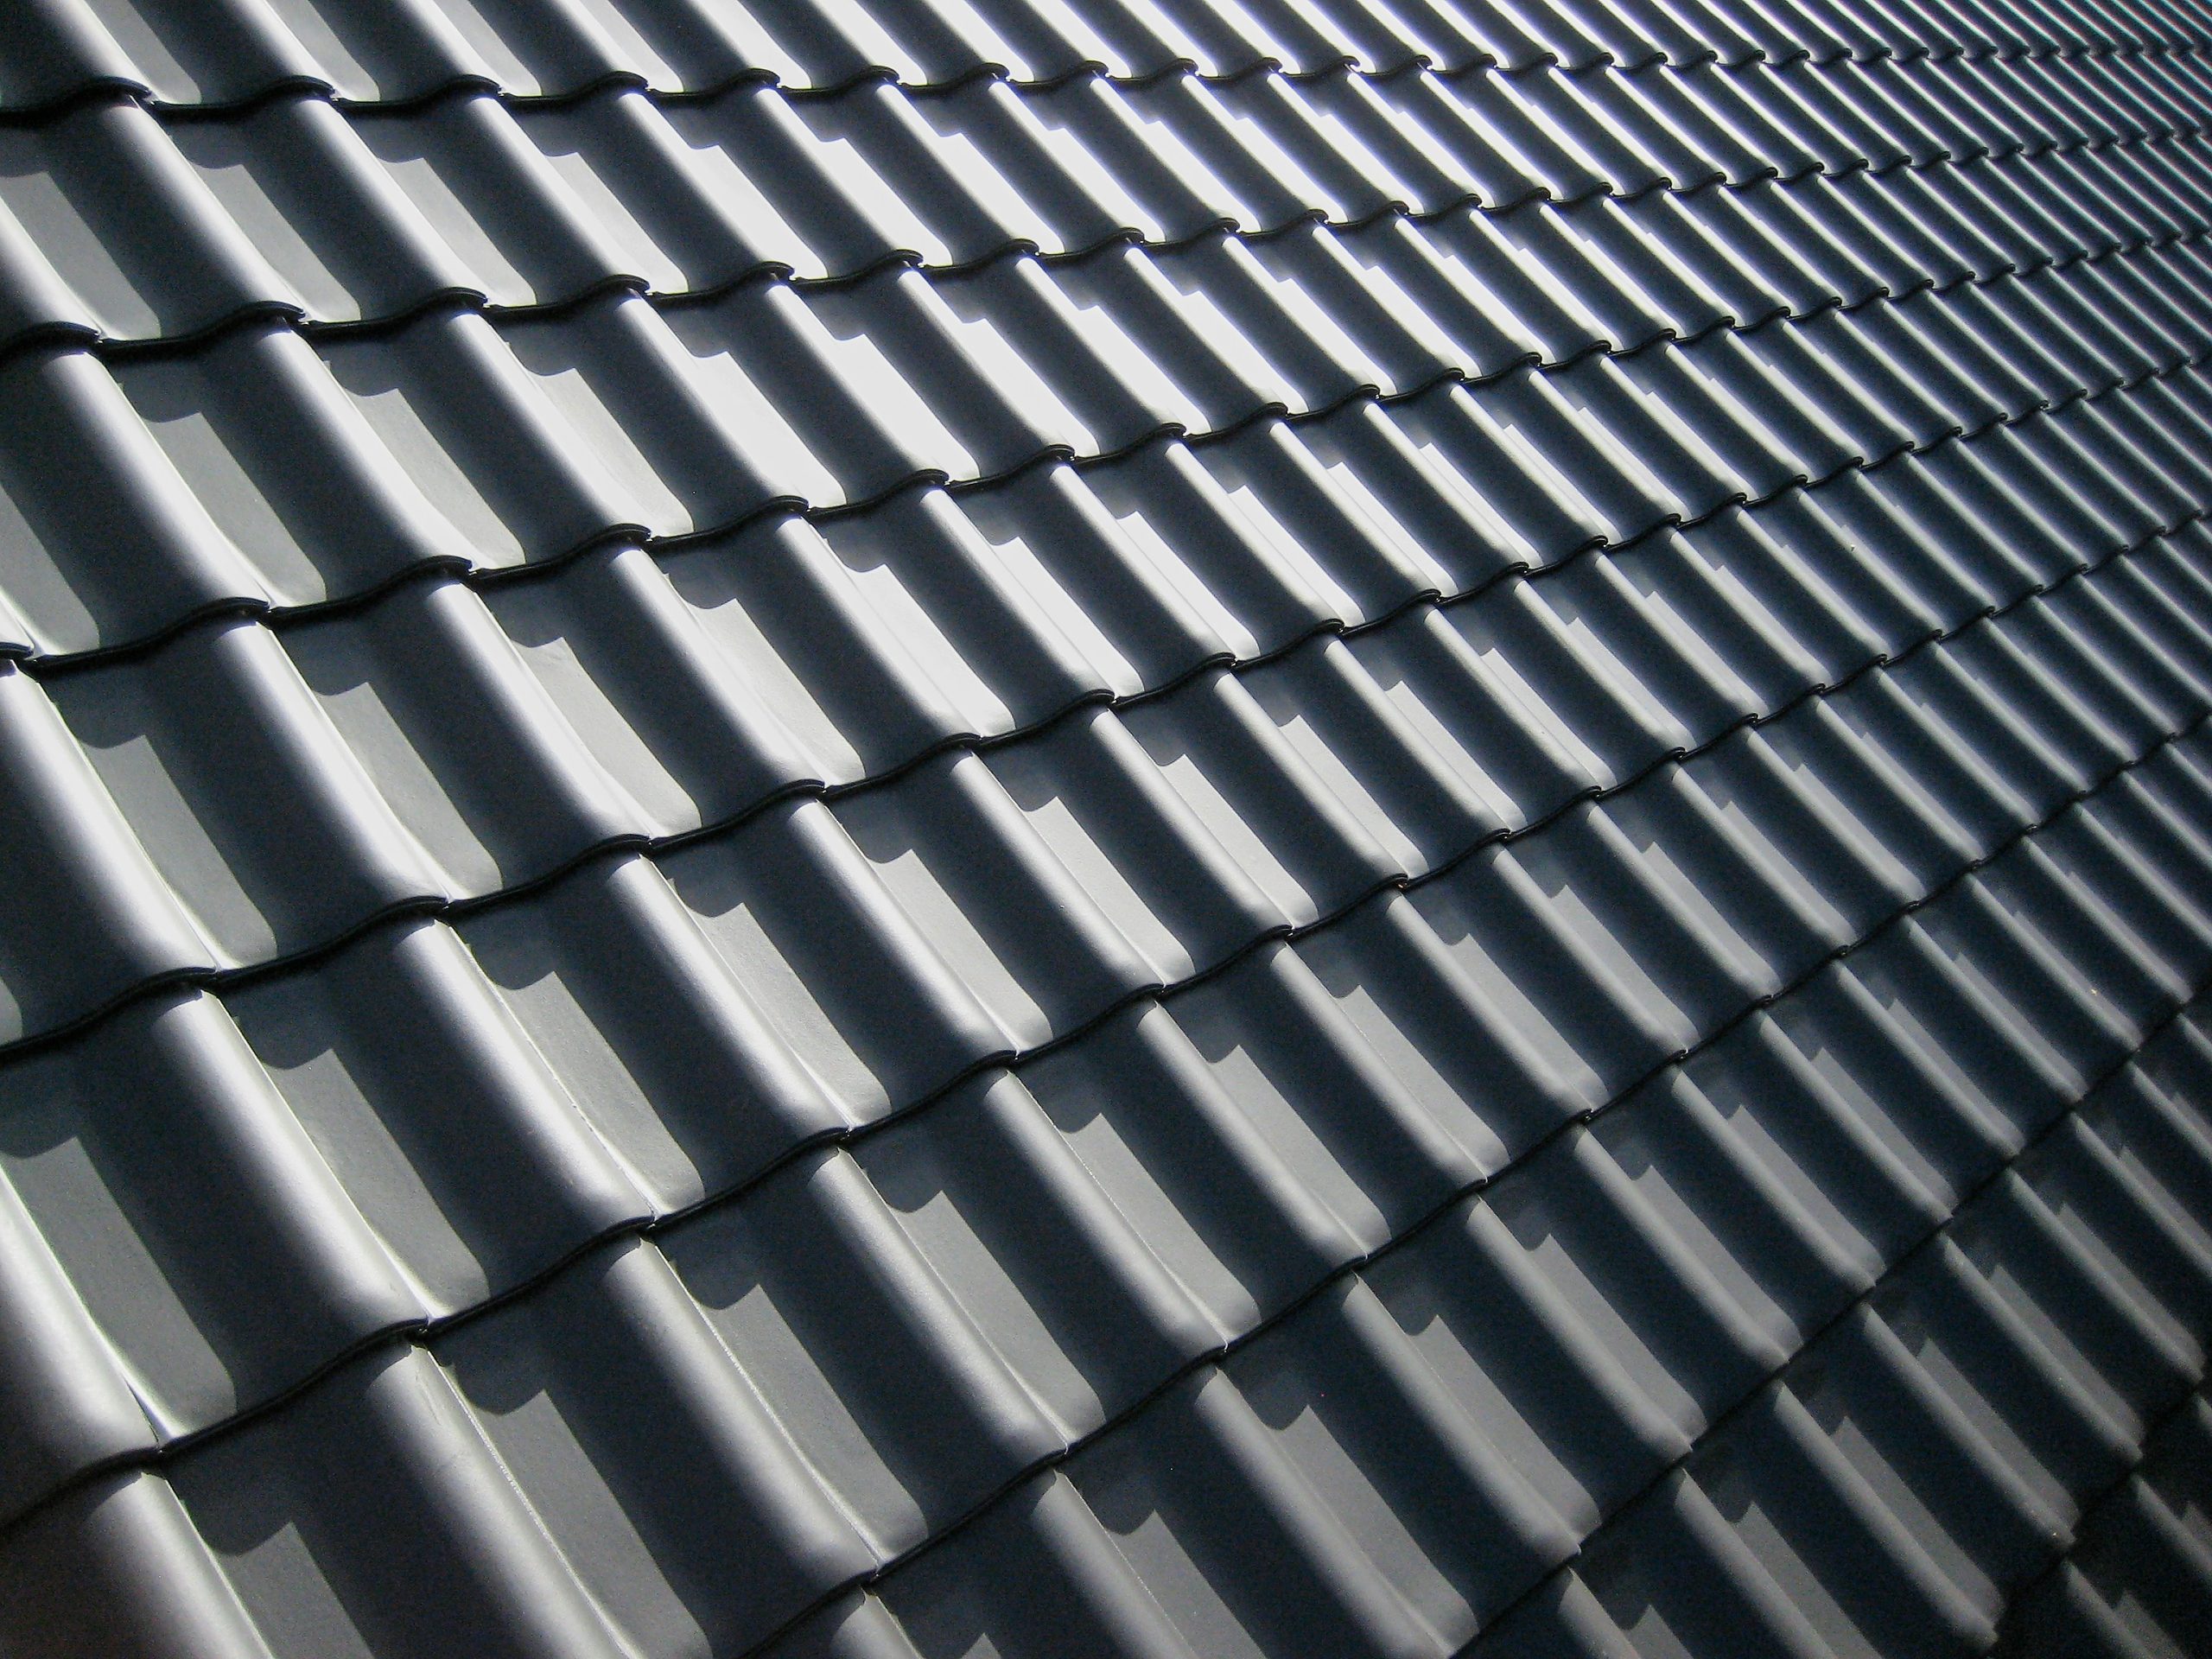 how to install metal roofing